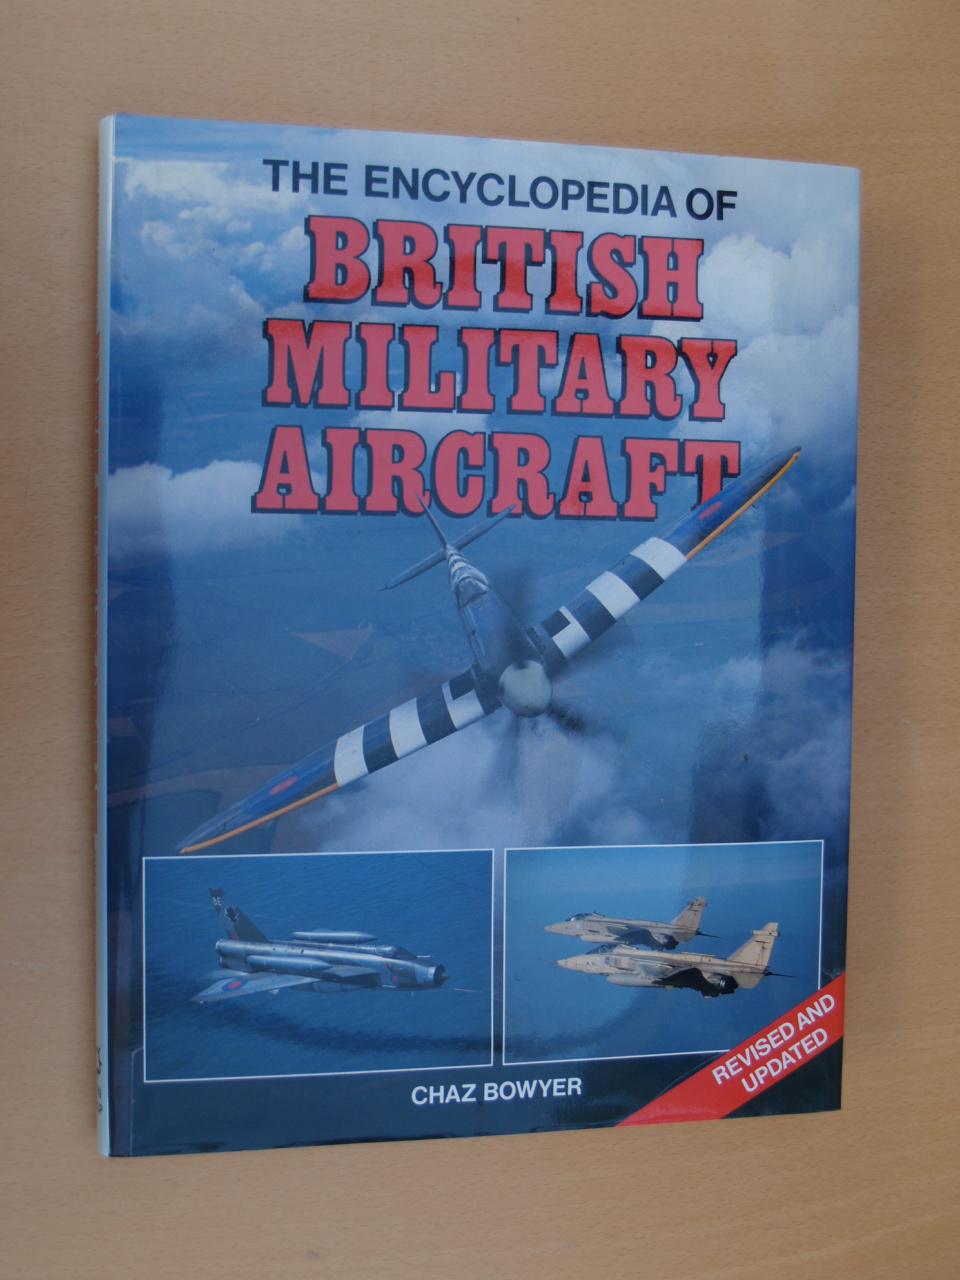 The Encyclopedia of British Military Aircraft - Chaz Bowyer